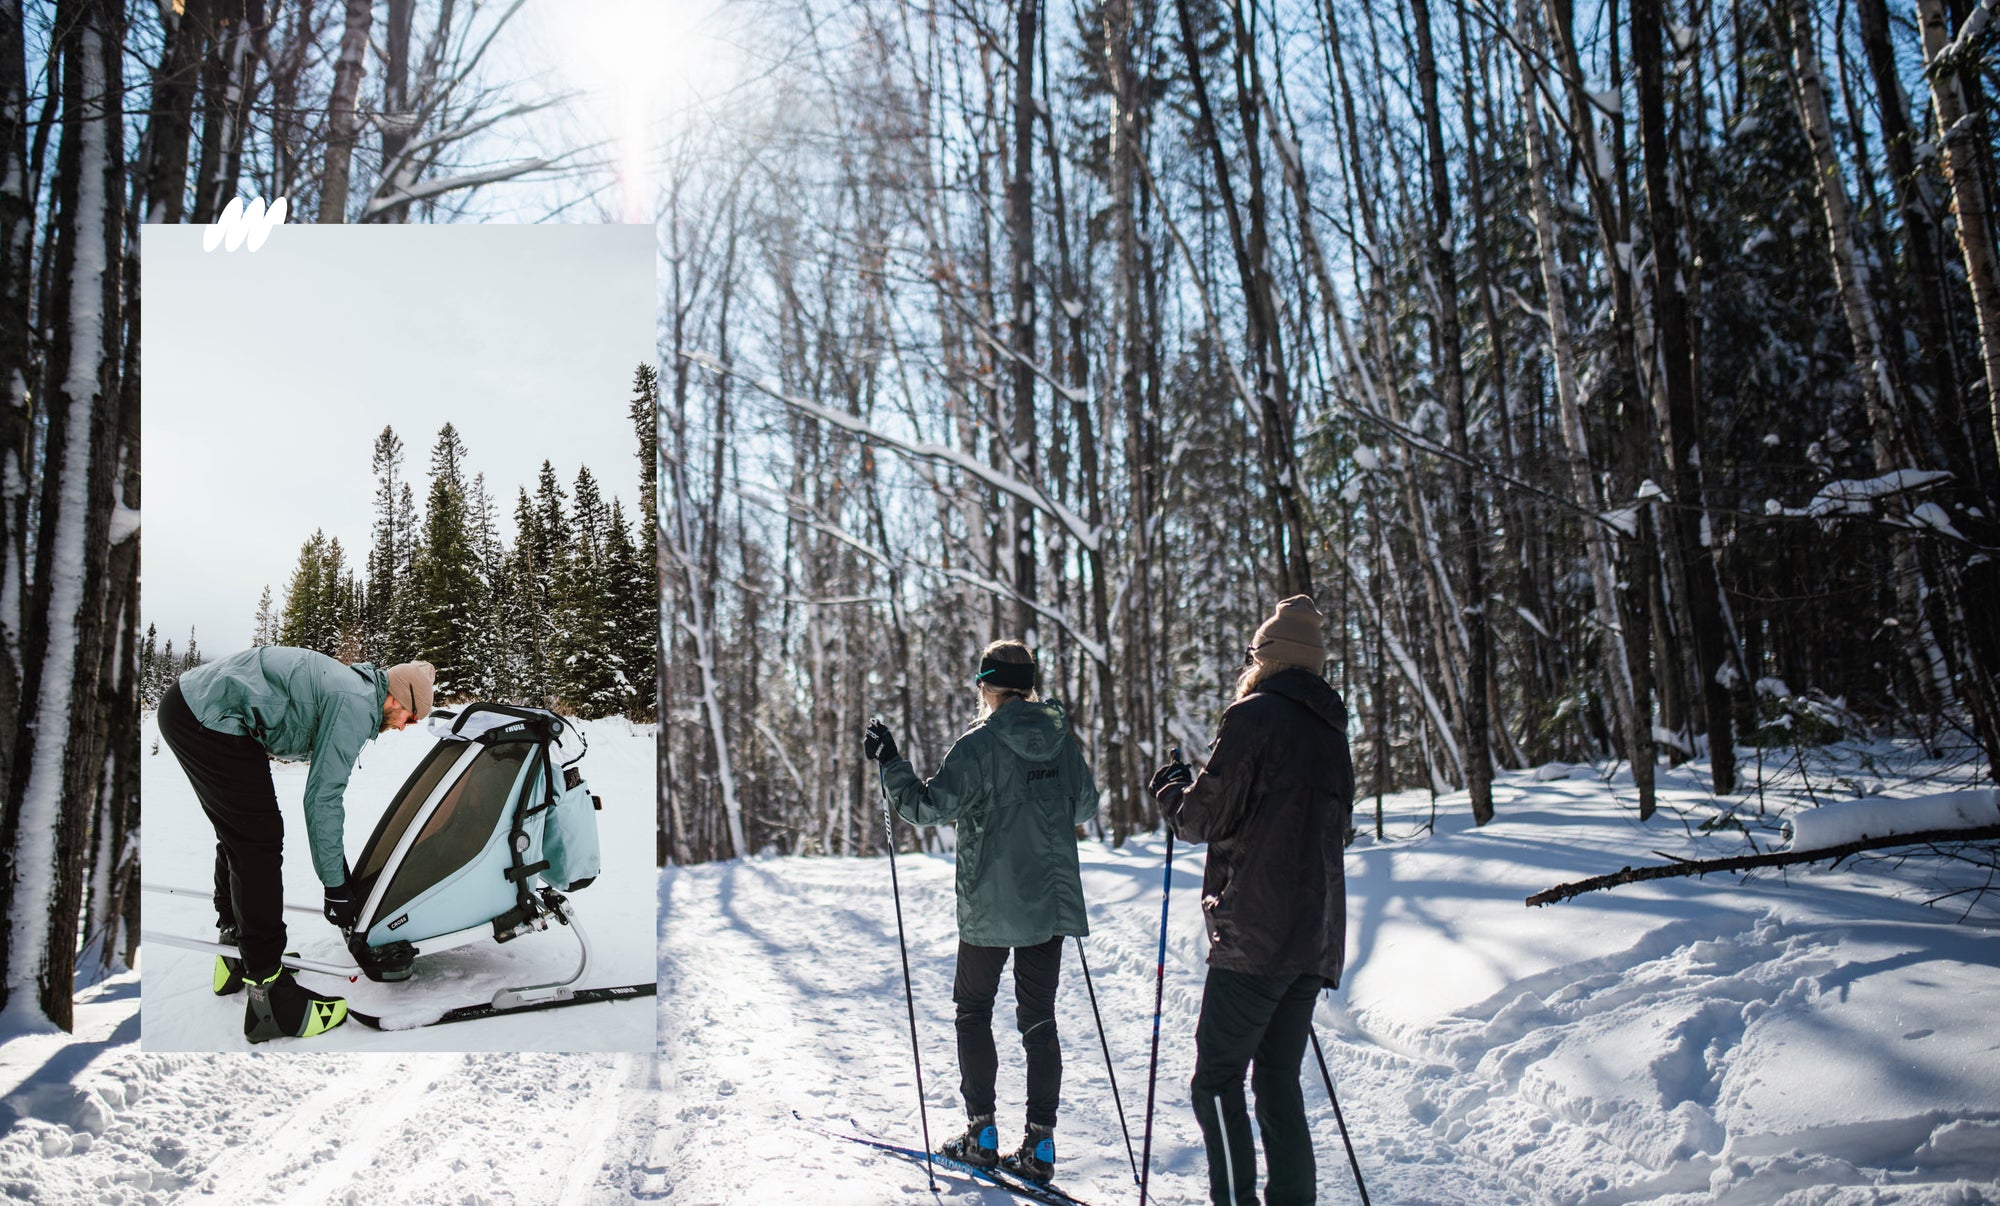 Glide into winter: 5 reasons to take up cross-country skiing